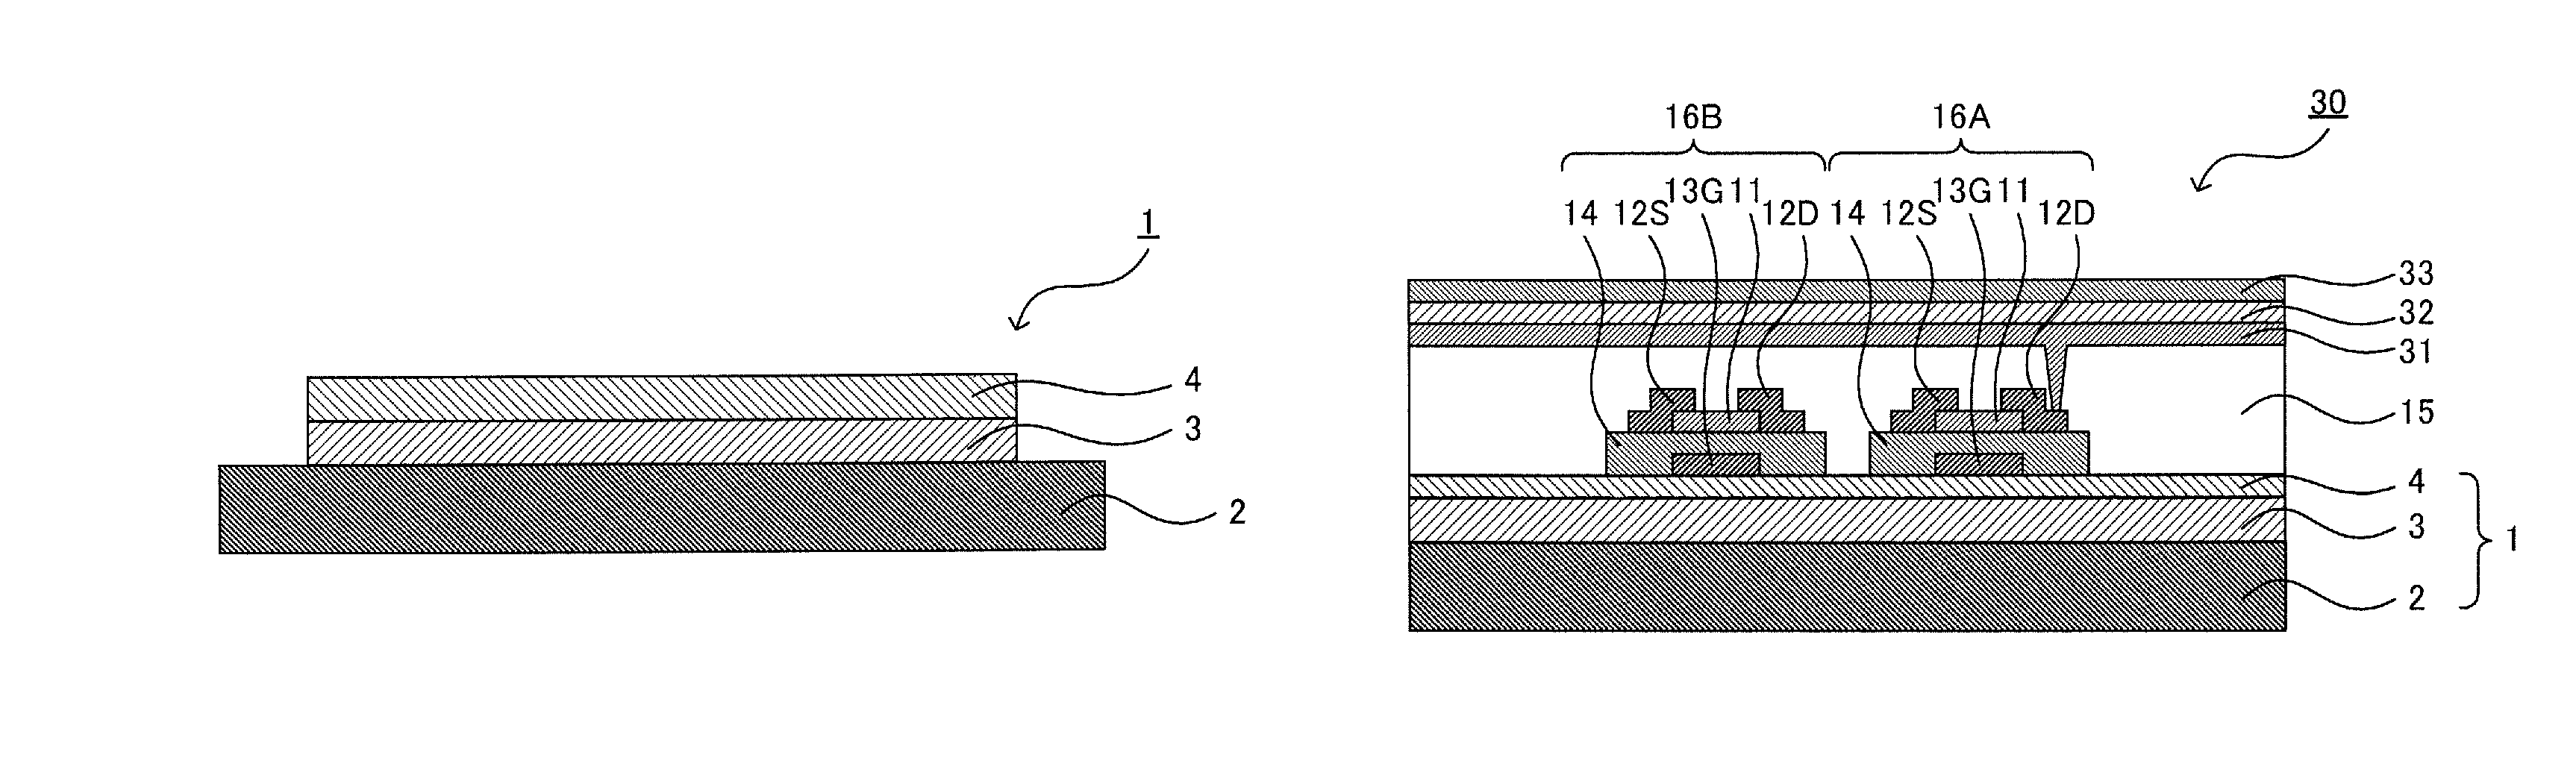 Substrate for flexible device, thin film transistor substrate for flexible device, flexible device, substrate for thin film element, thin film element, thin film transistor, method for manufacturing substrate for thin film element, method for manufacturing thin film element, and method for manufacturing thin film transistor